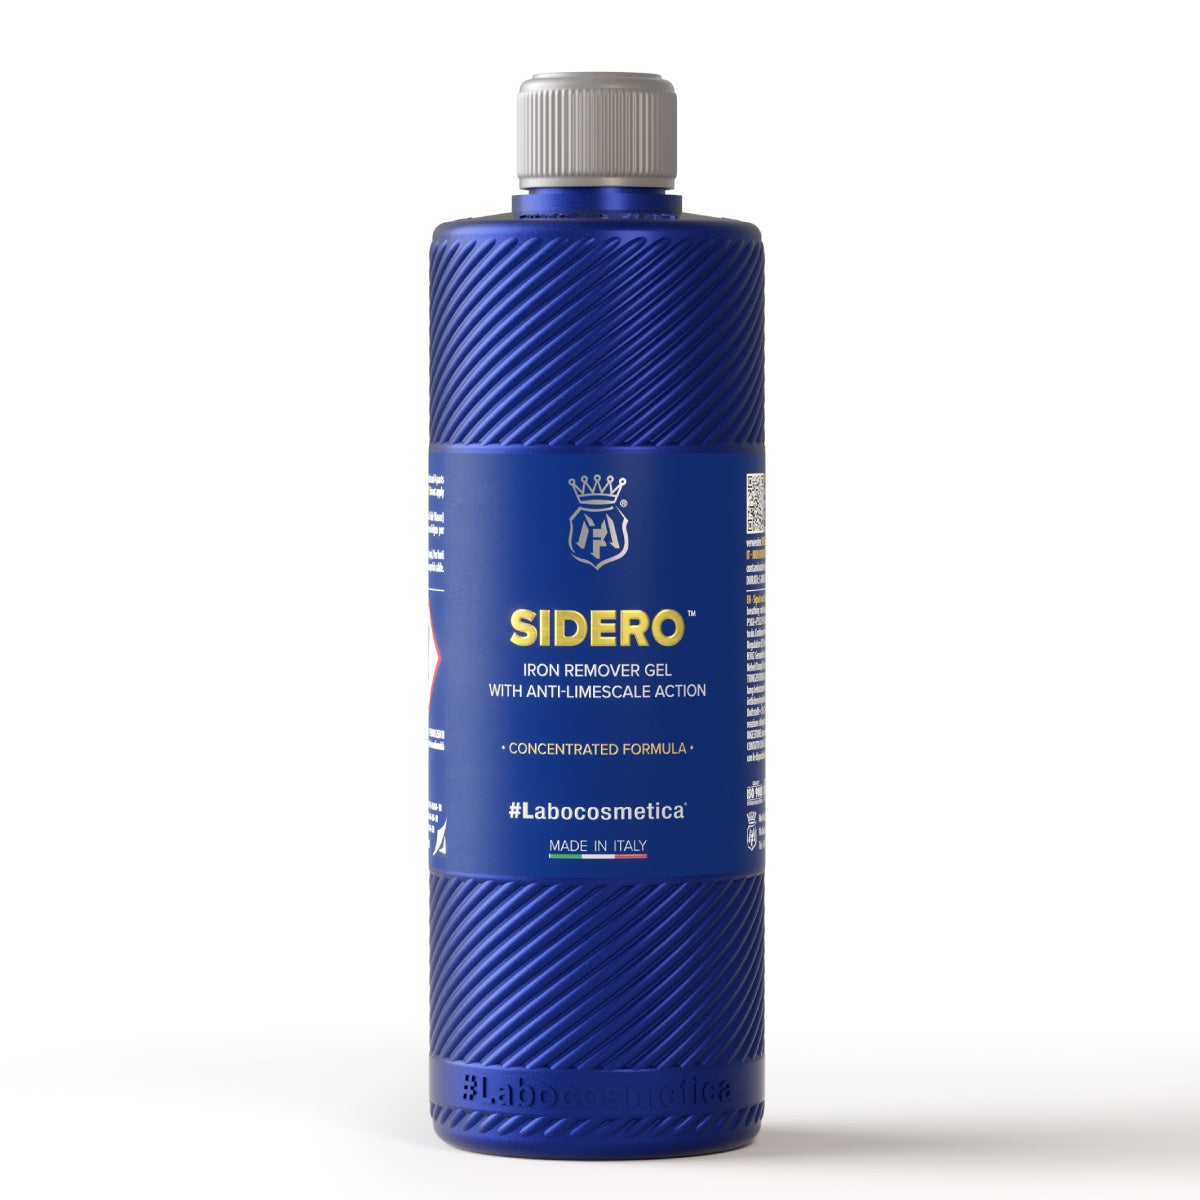 #Labocosmetica #SIDERO (Iron Remover Gel with Anti-Limescale Action) - 500ml